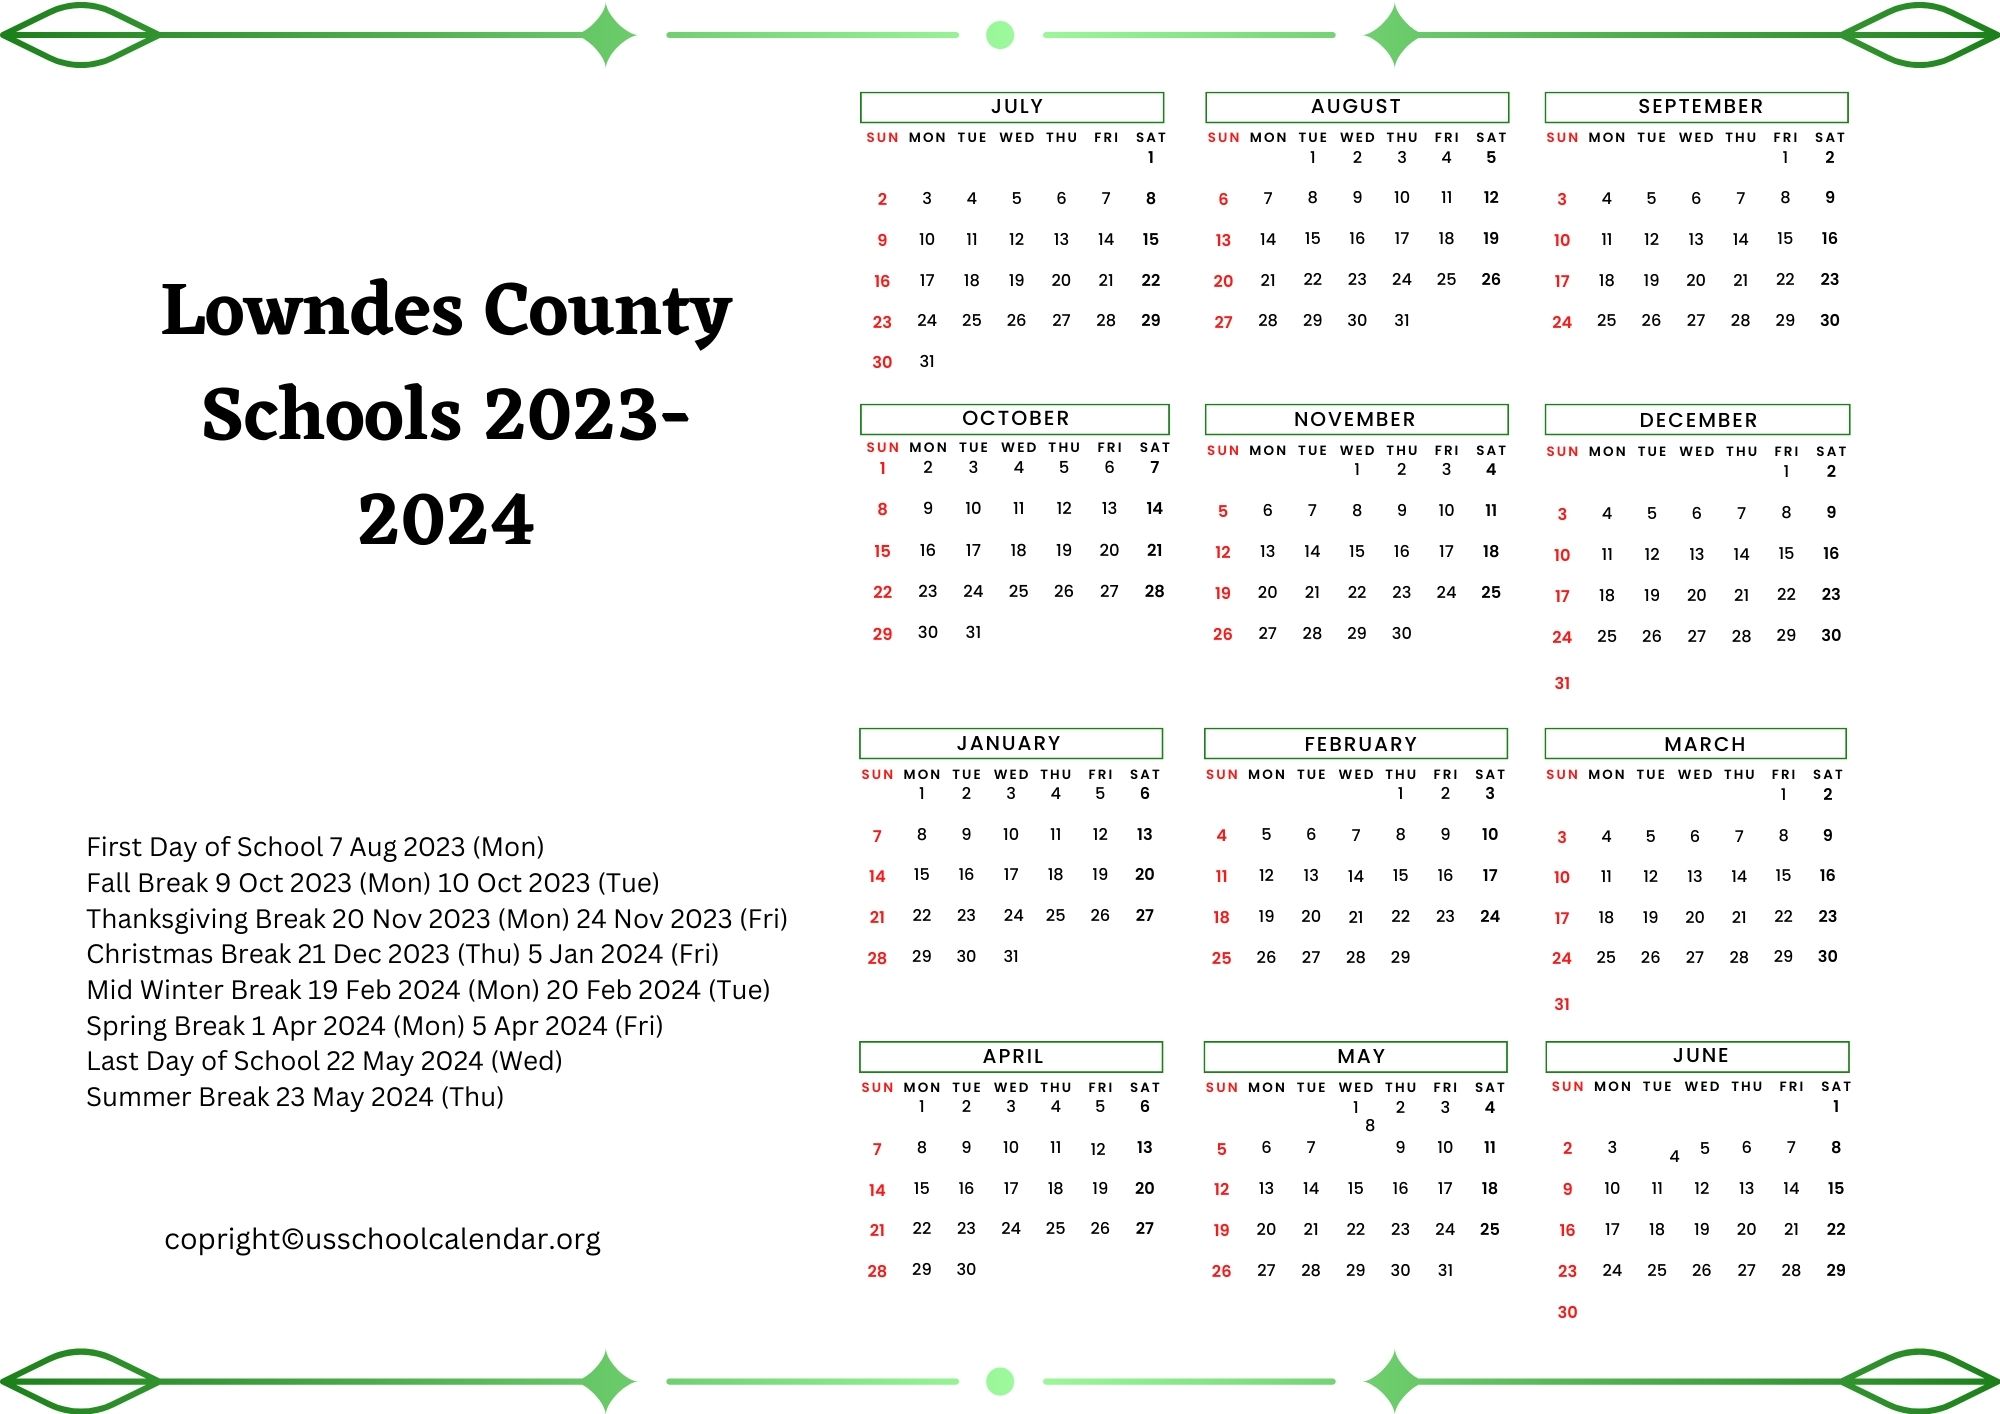 Lowndes County Schools Calendar with Holidays 2023 2024